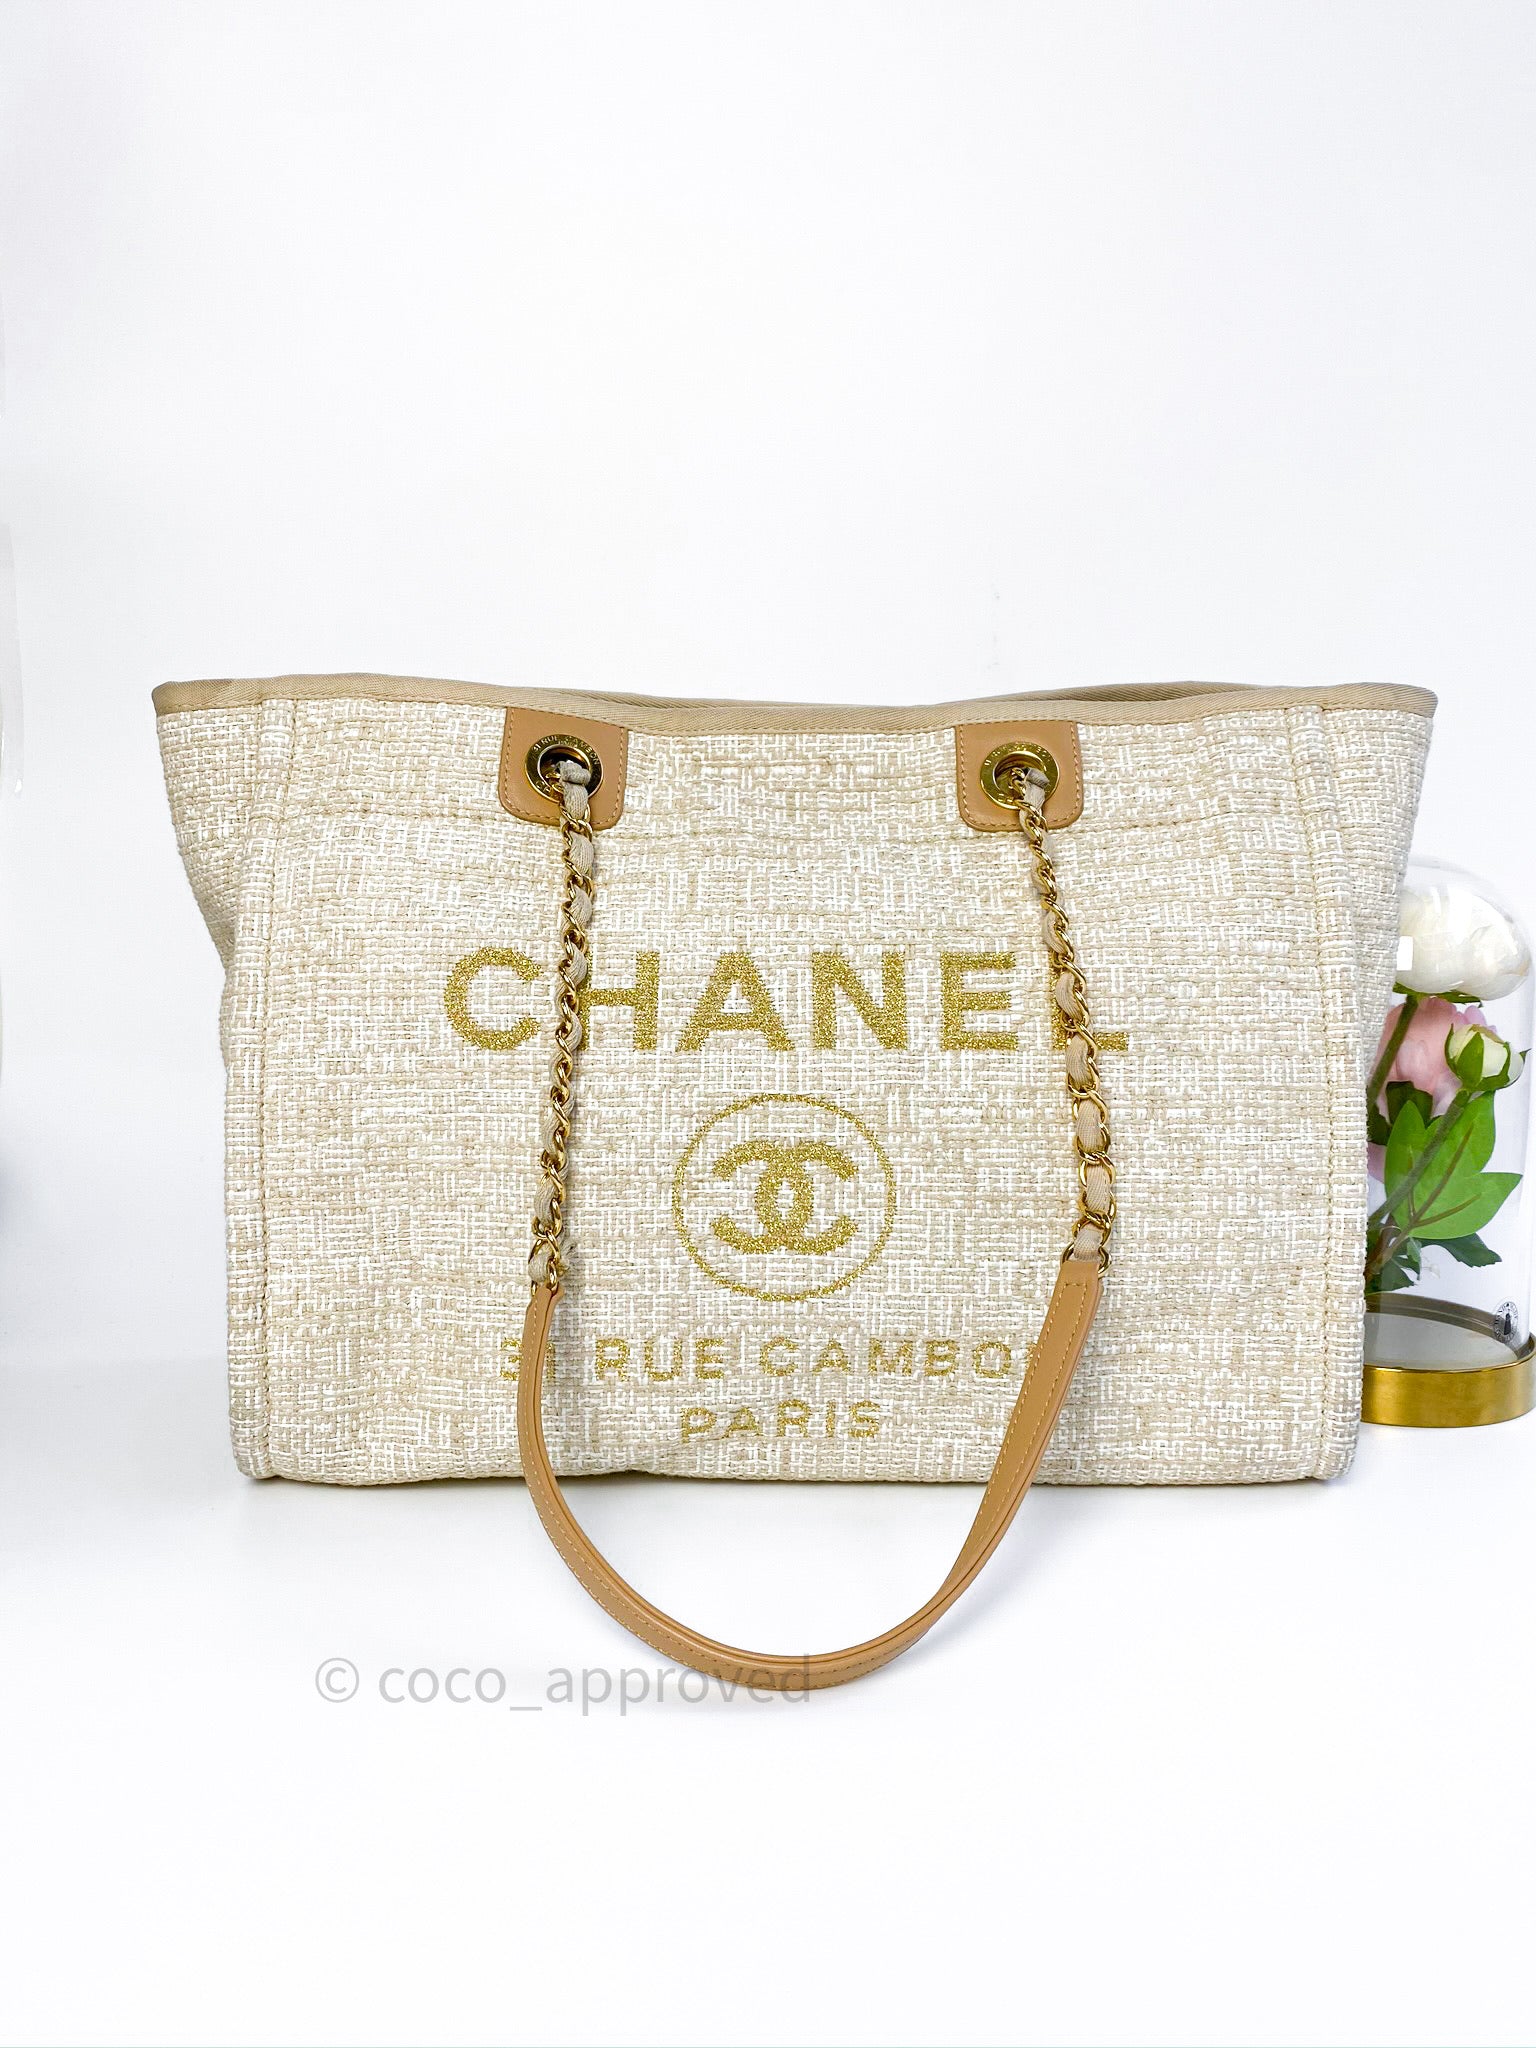 deauville chanel tote bag canvas